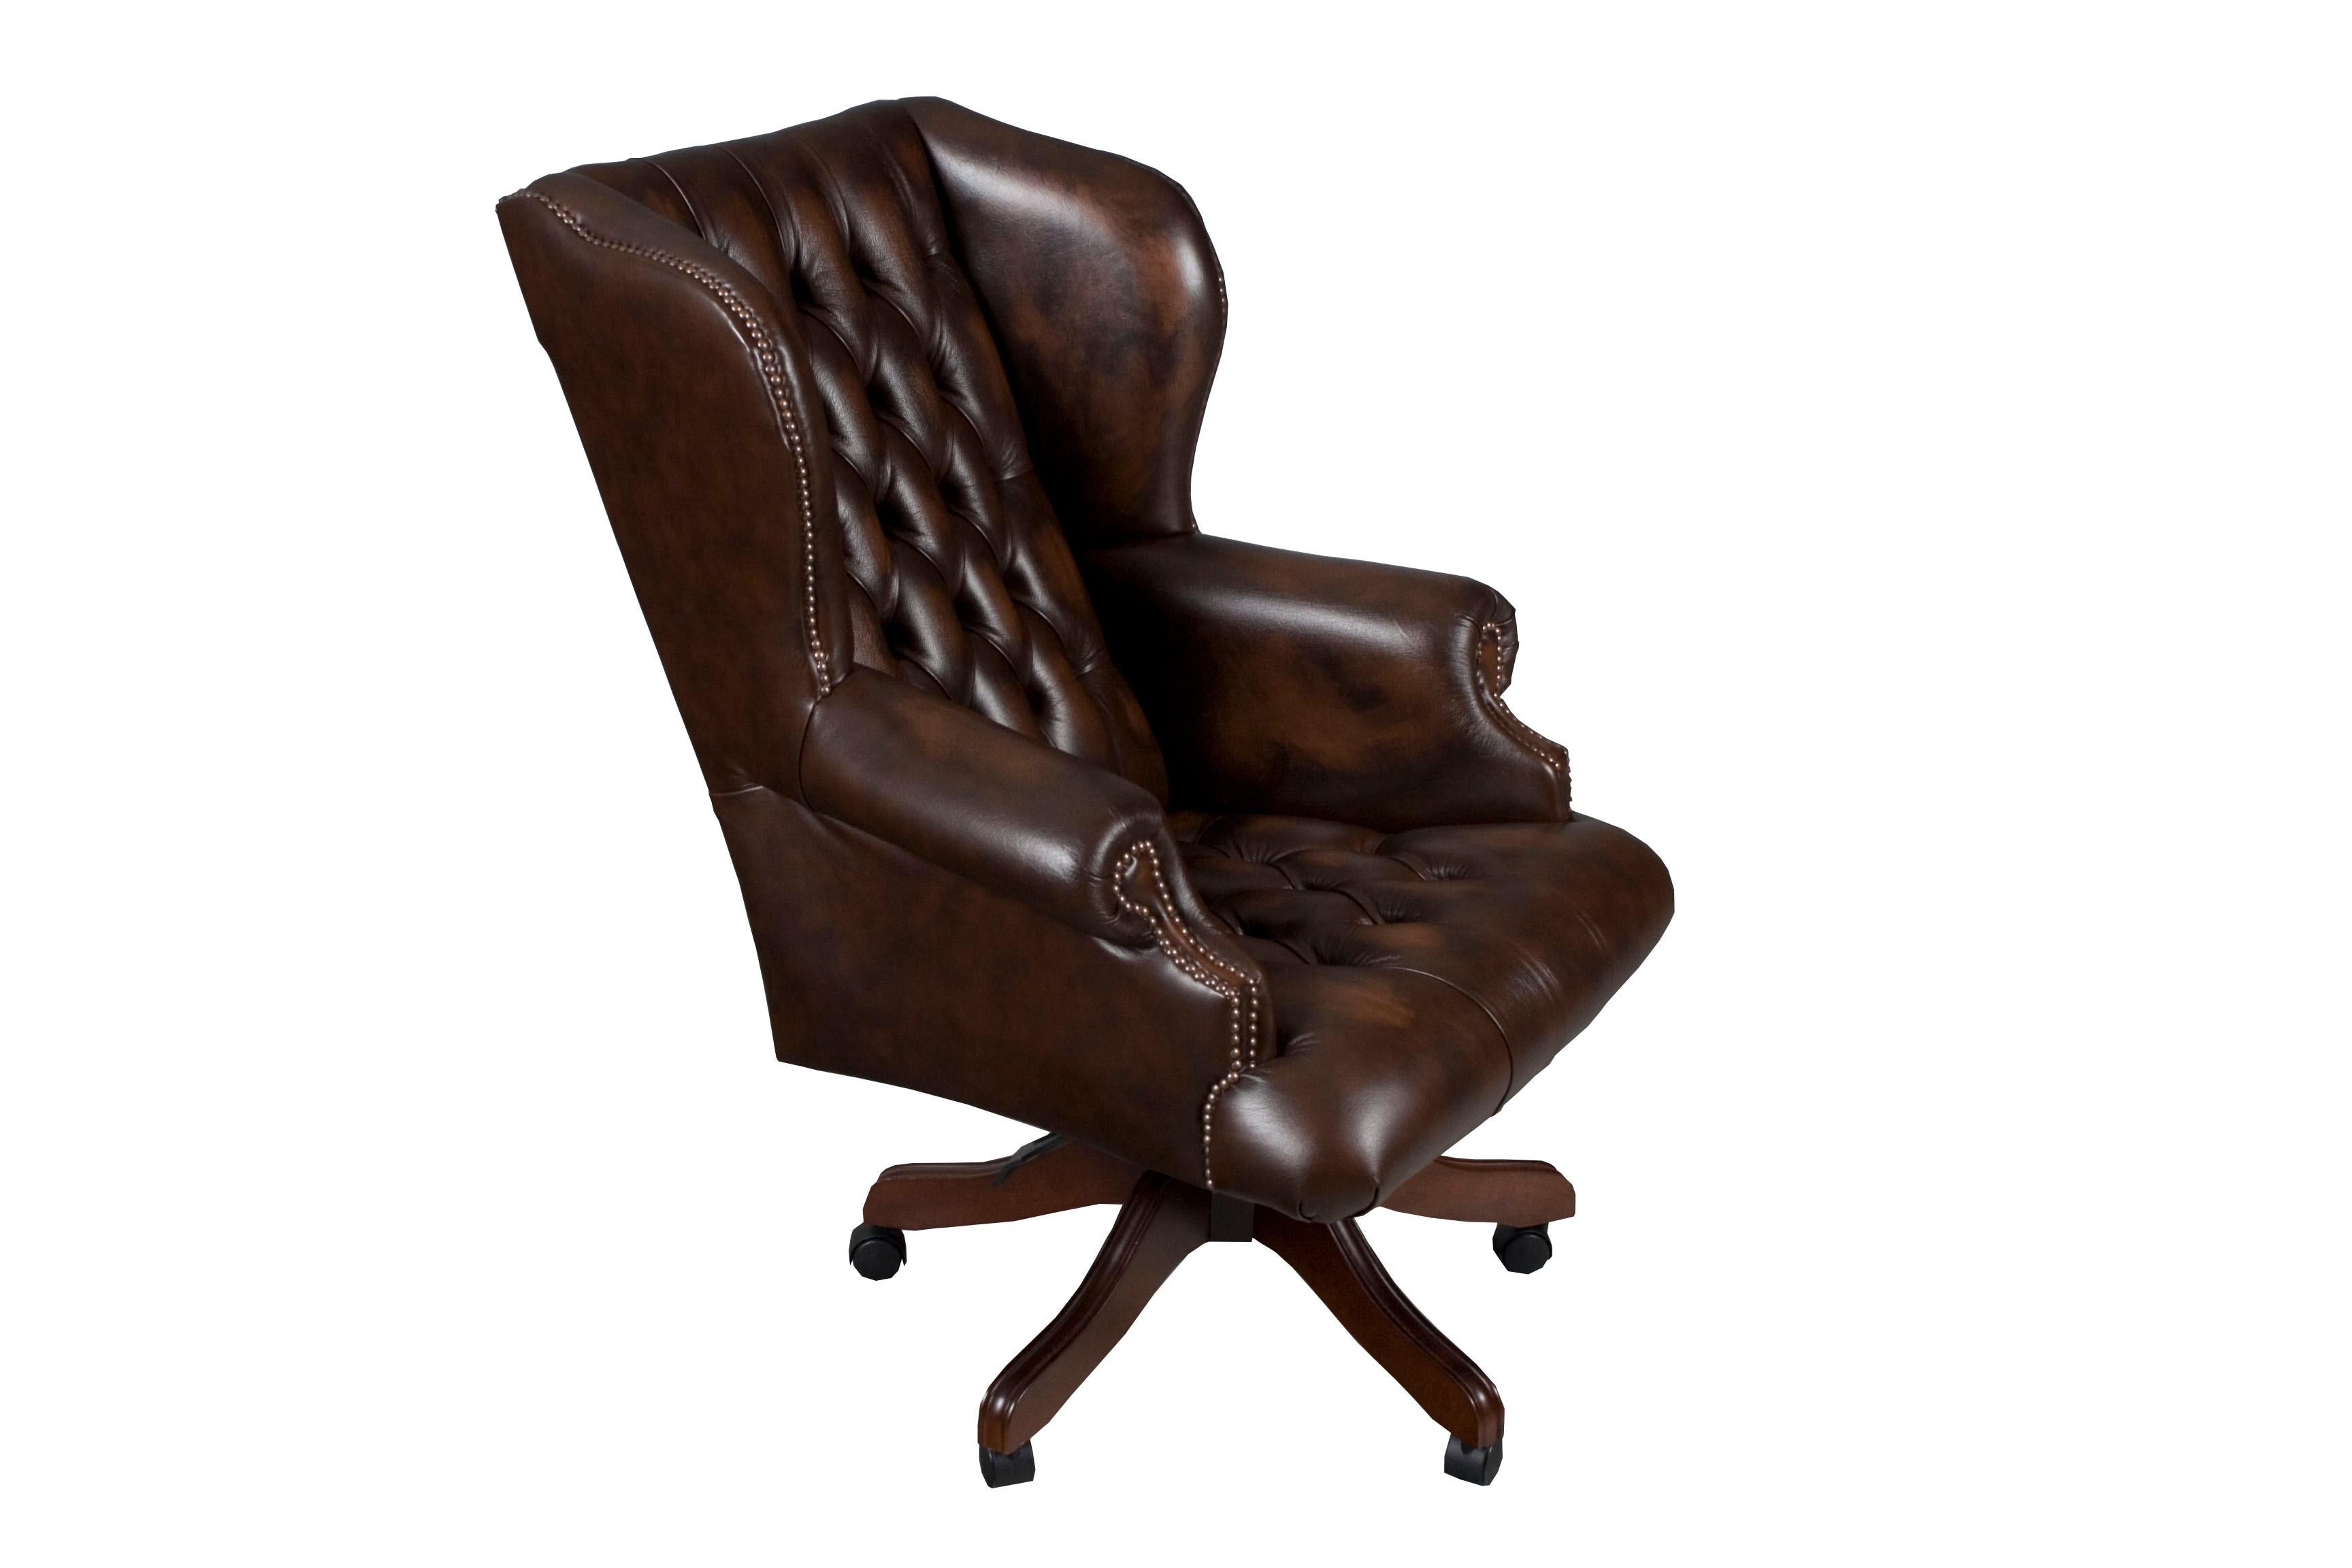 This exquisite piece is a new, English made large leather desk chair. The maker in England who crafted it has over 40 years experience in creating masterpieces of leather furniture! He uses the finest techniques including eight way hand tied strings